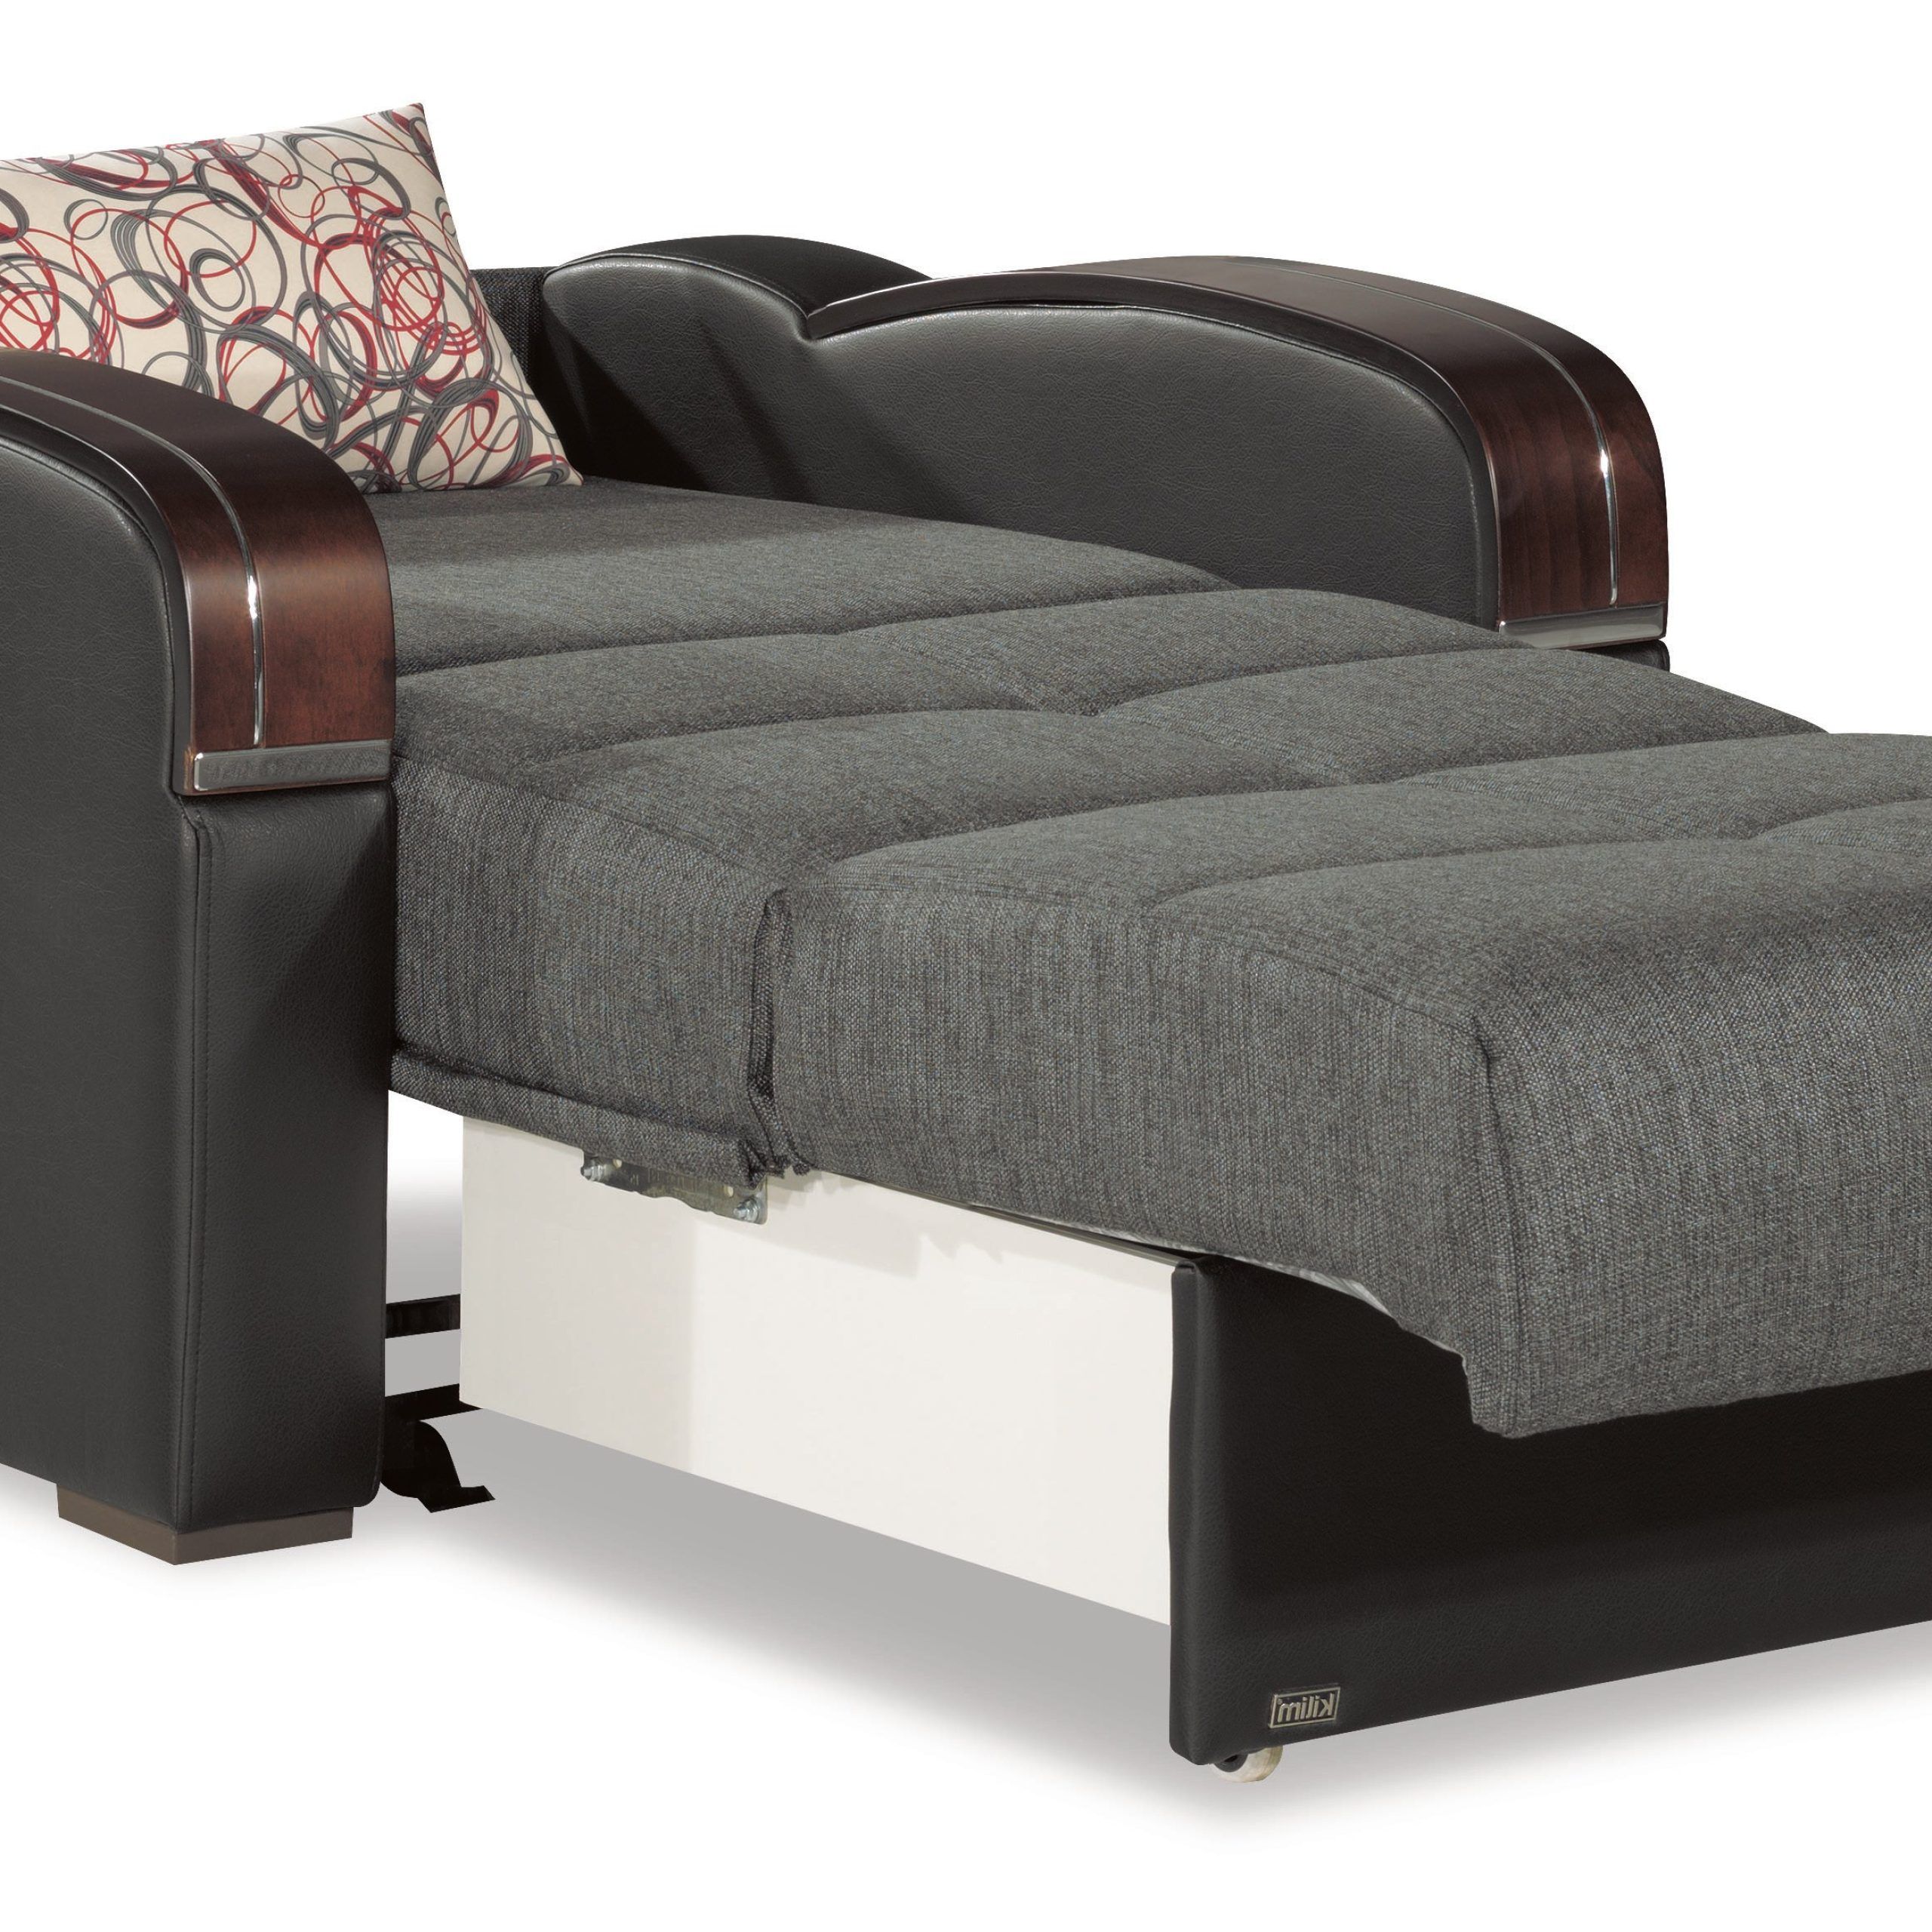 Convertible Light Gray Chair Beds Throughout Trendy Sleep Plus Gray Convertible Chair Bedcasamode (View 3 of 15)